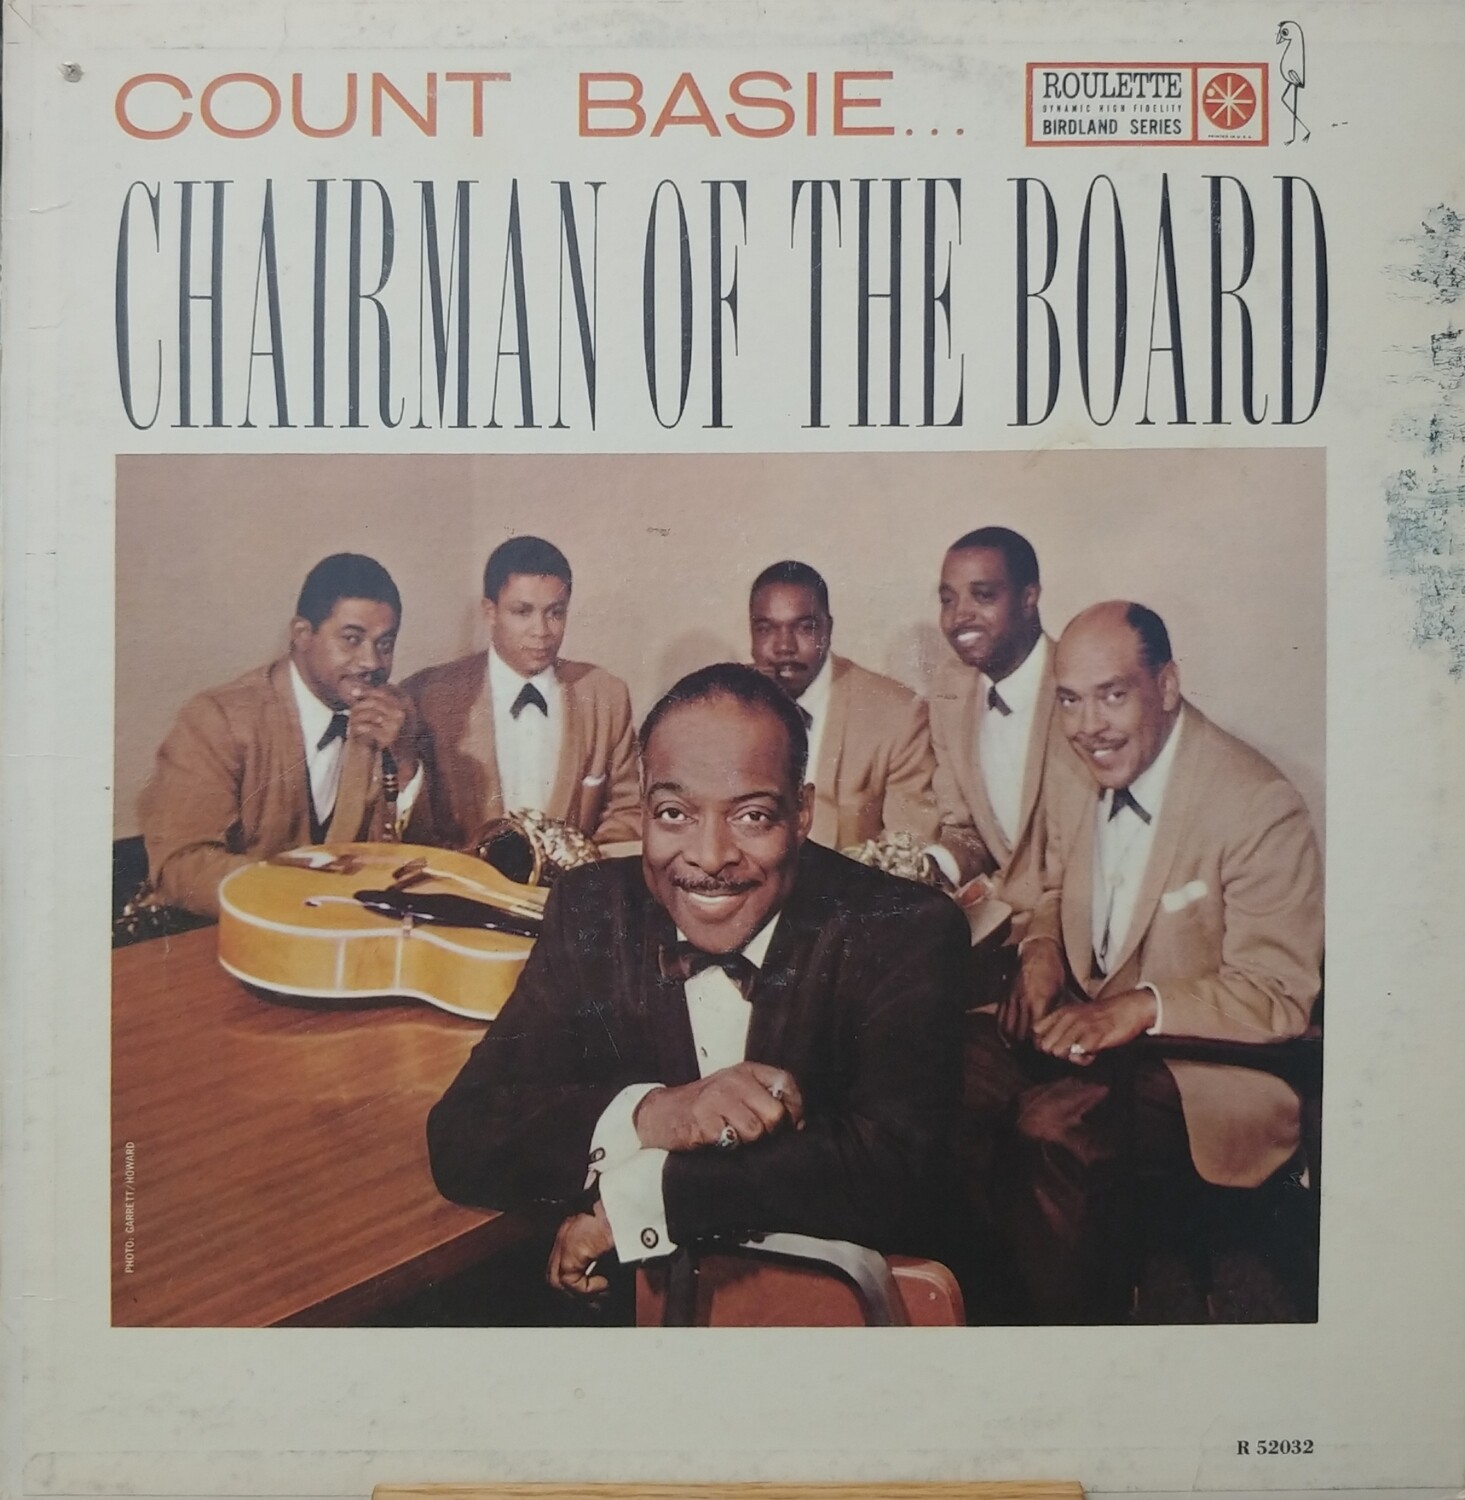 Count Basie & His Orchestra - Chairman of the board